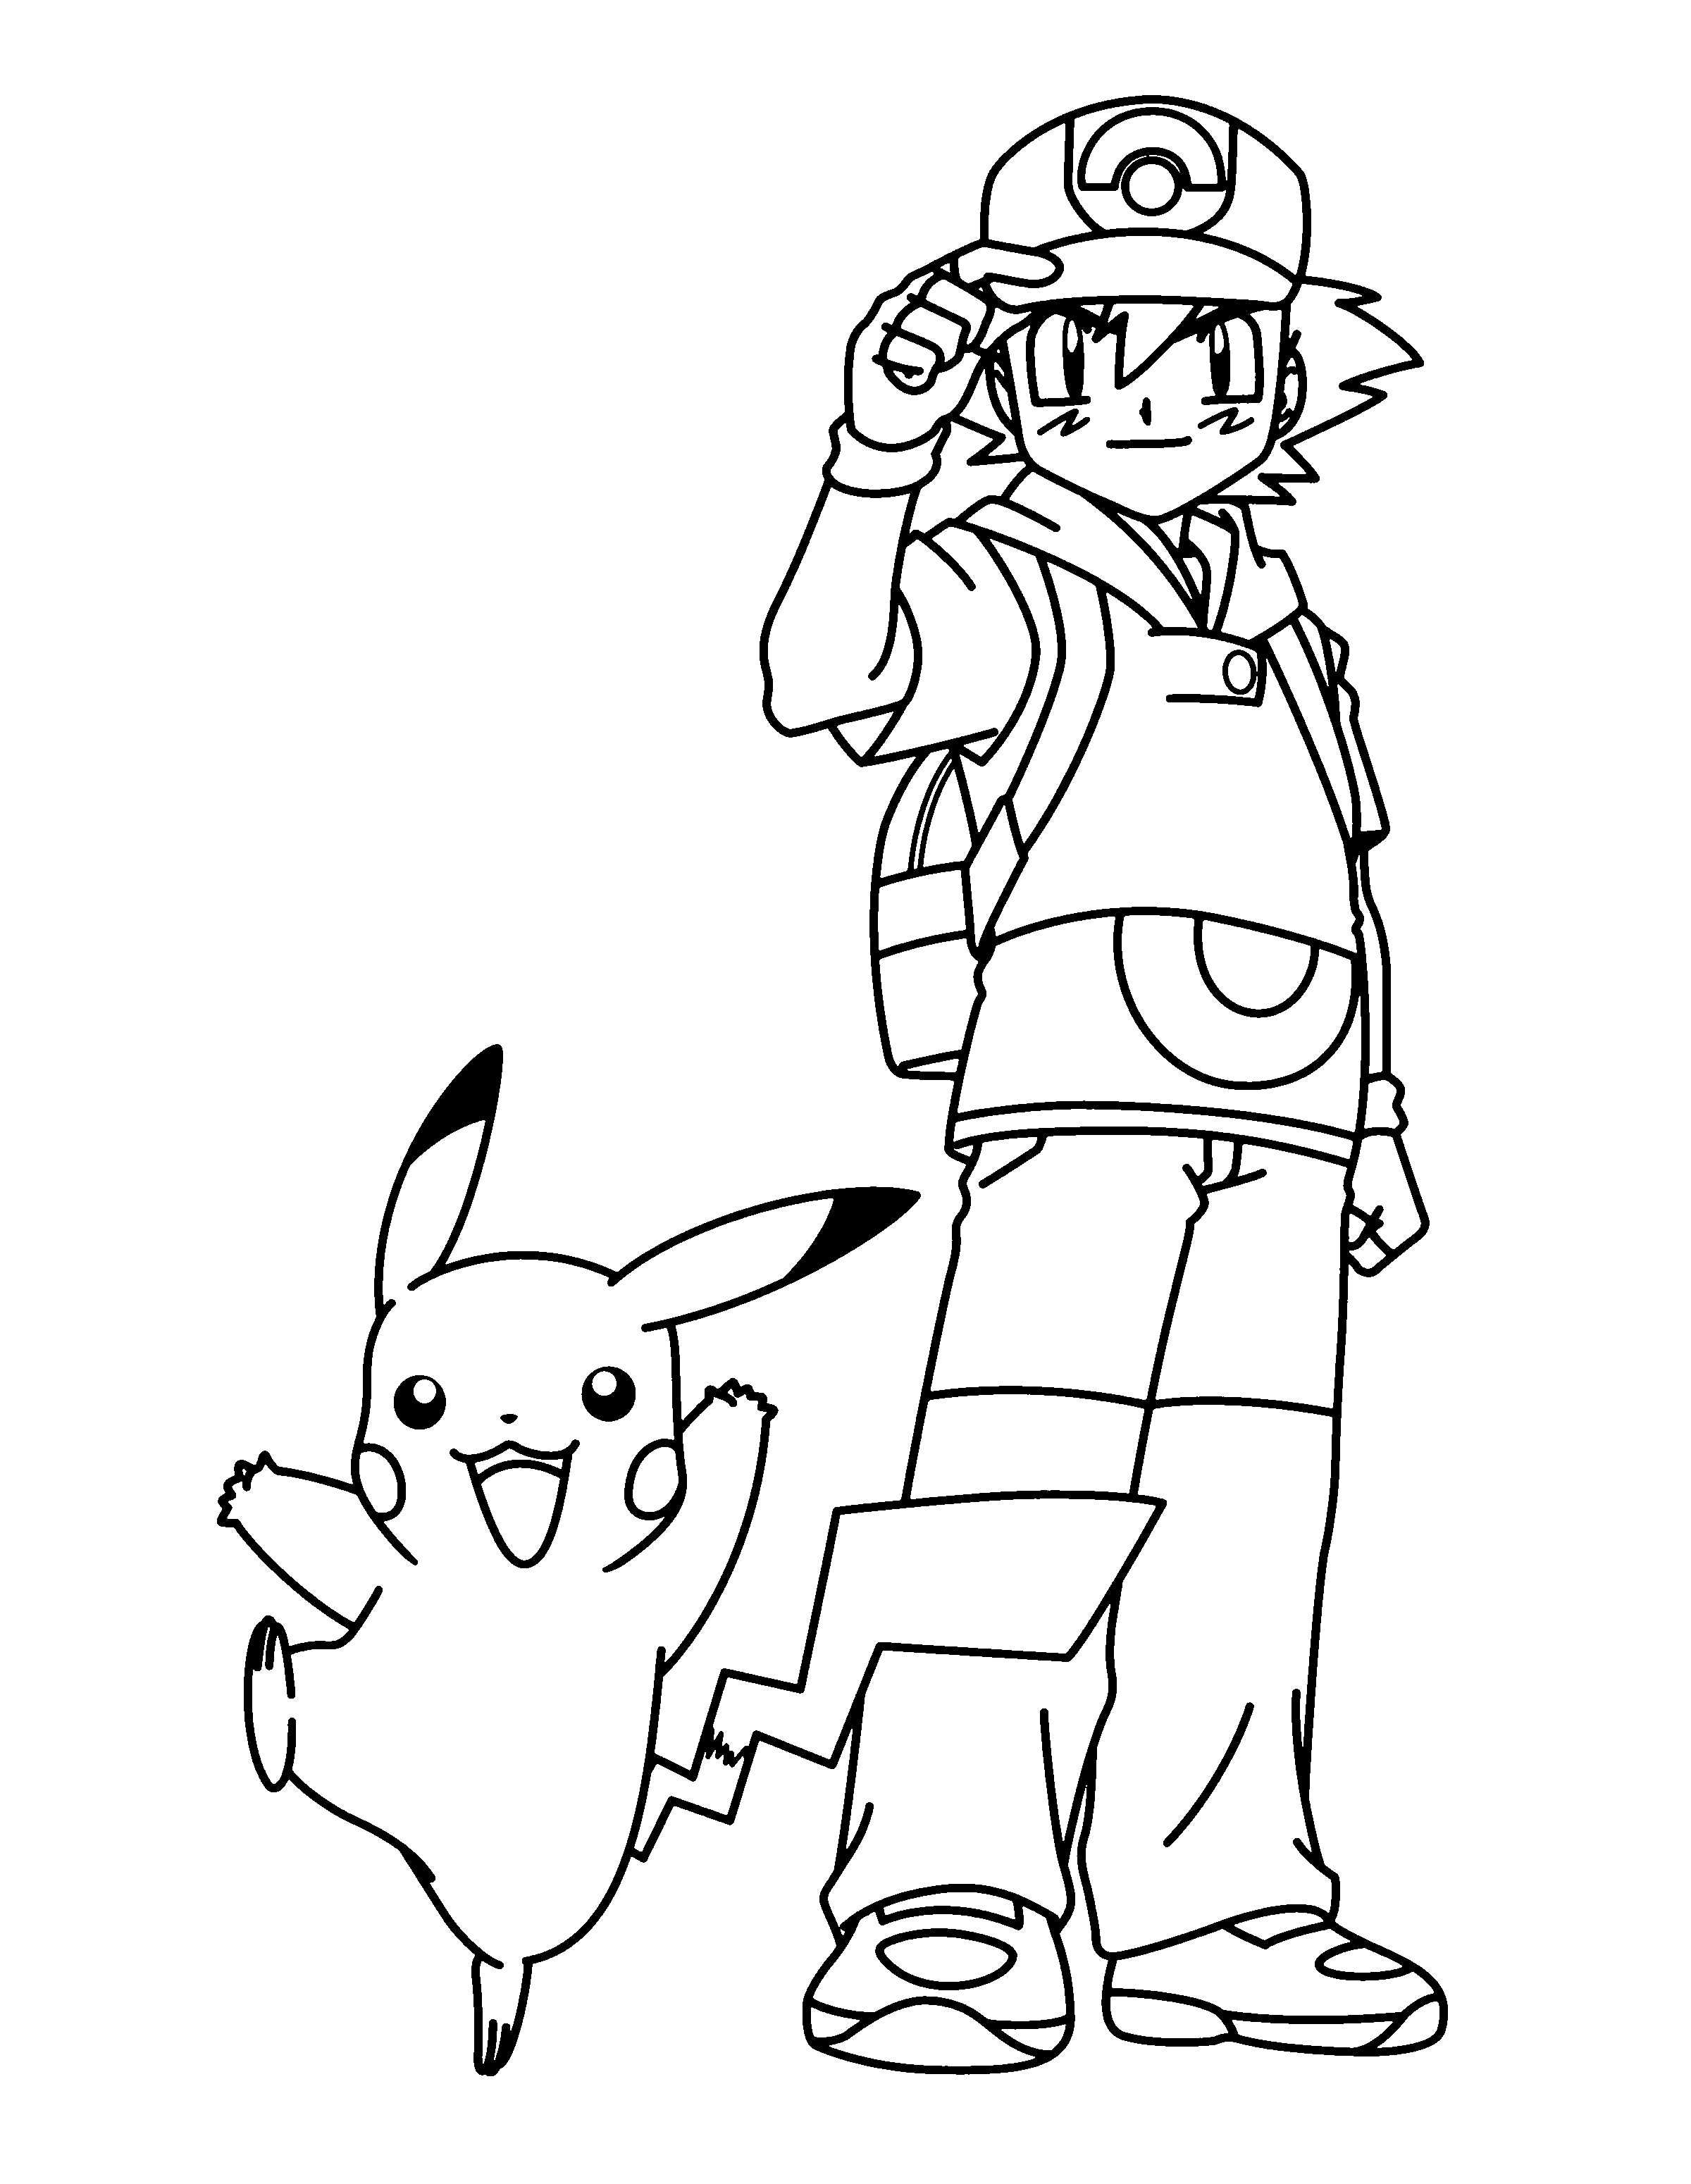 Misty Pokemon Coloring Pages - Coloring Home